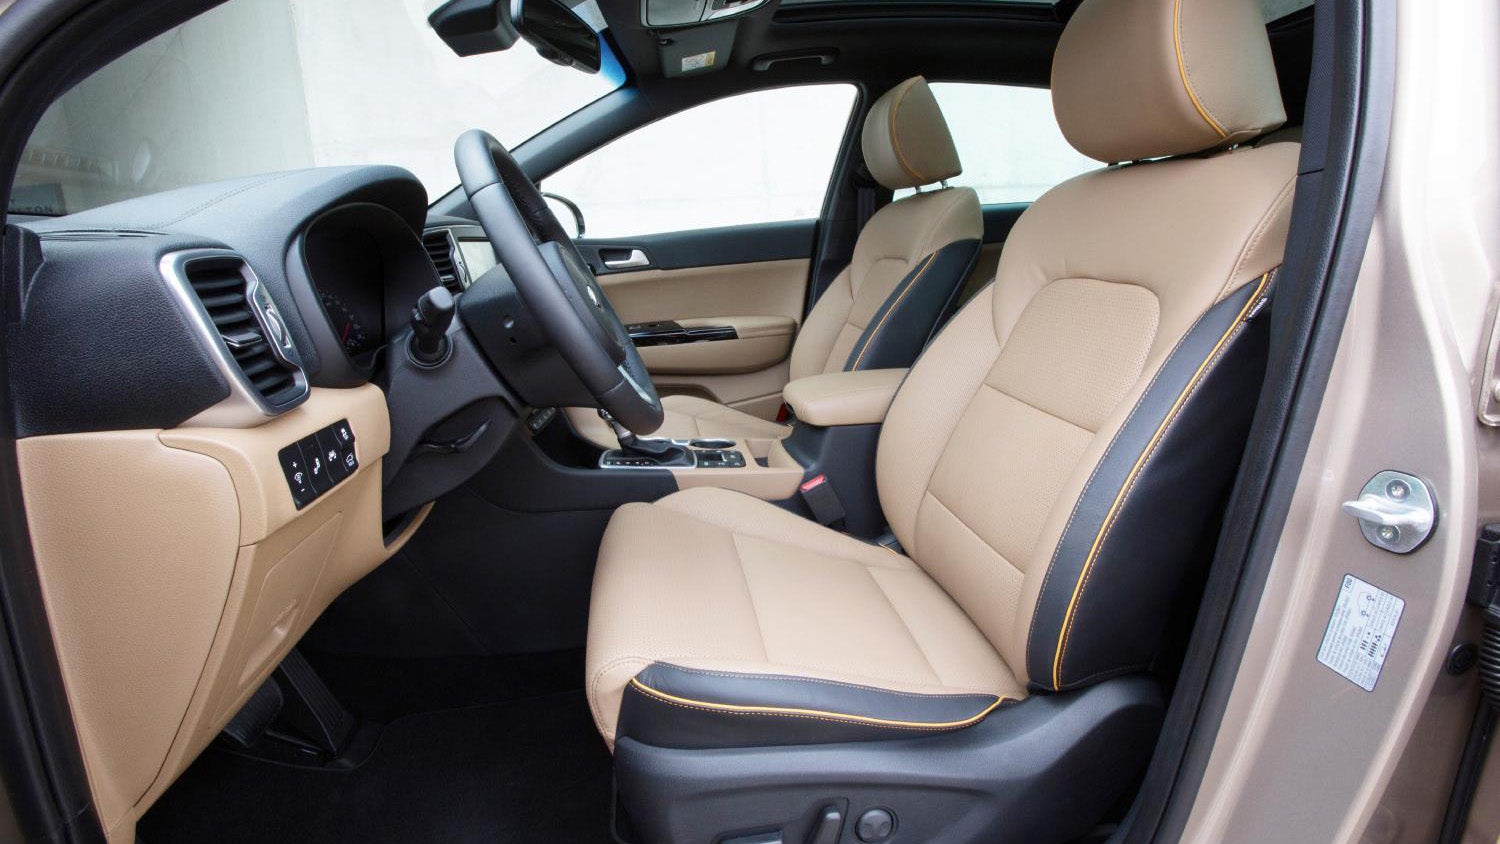 Interior view of a Kia Sportage showing seats and dashboard.